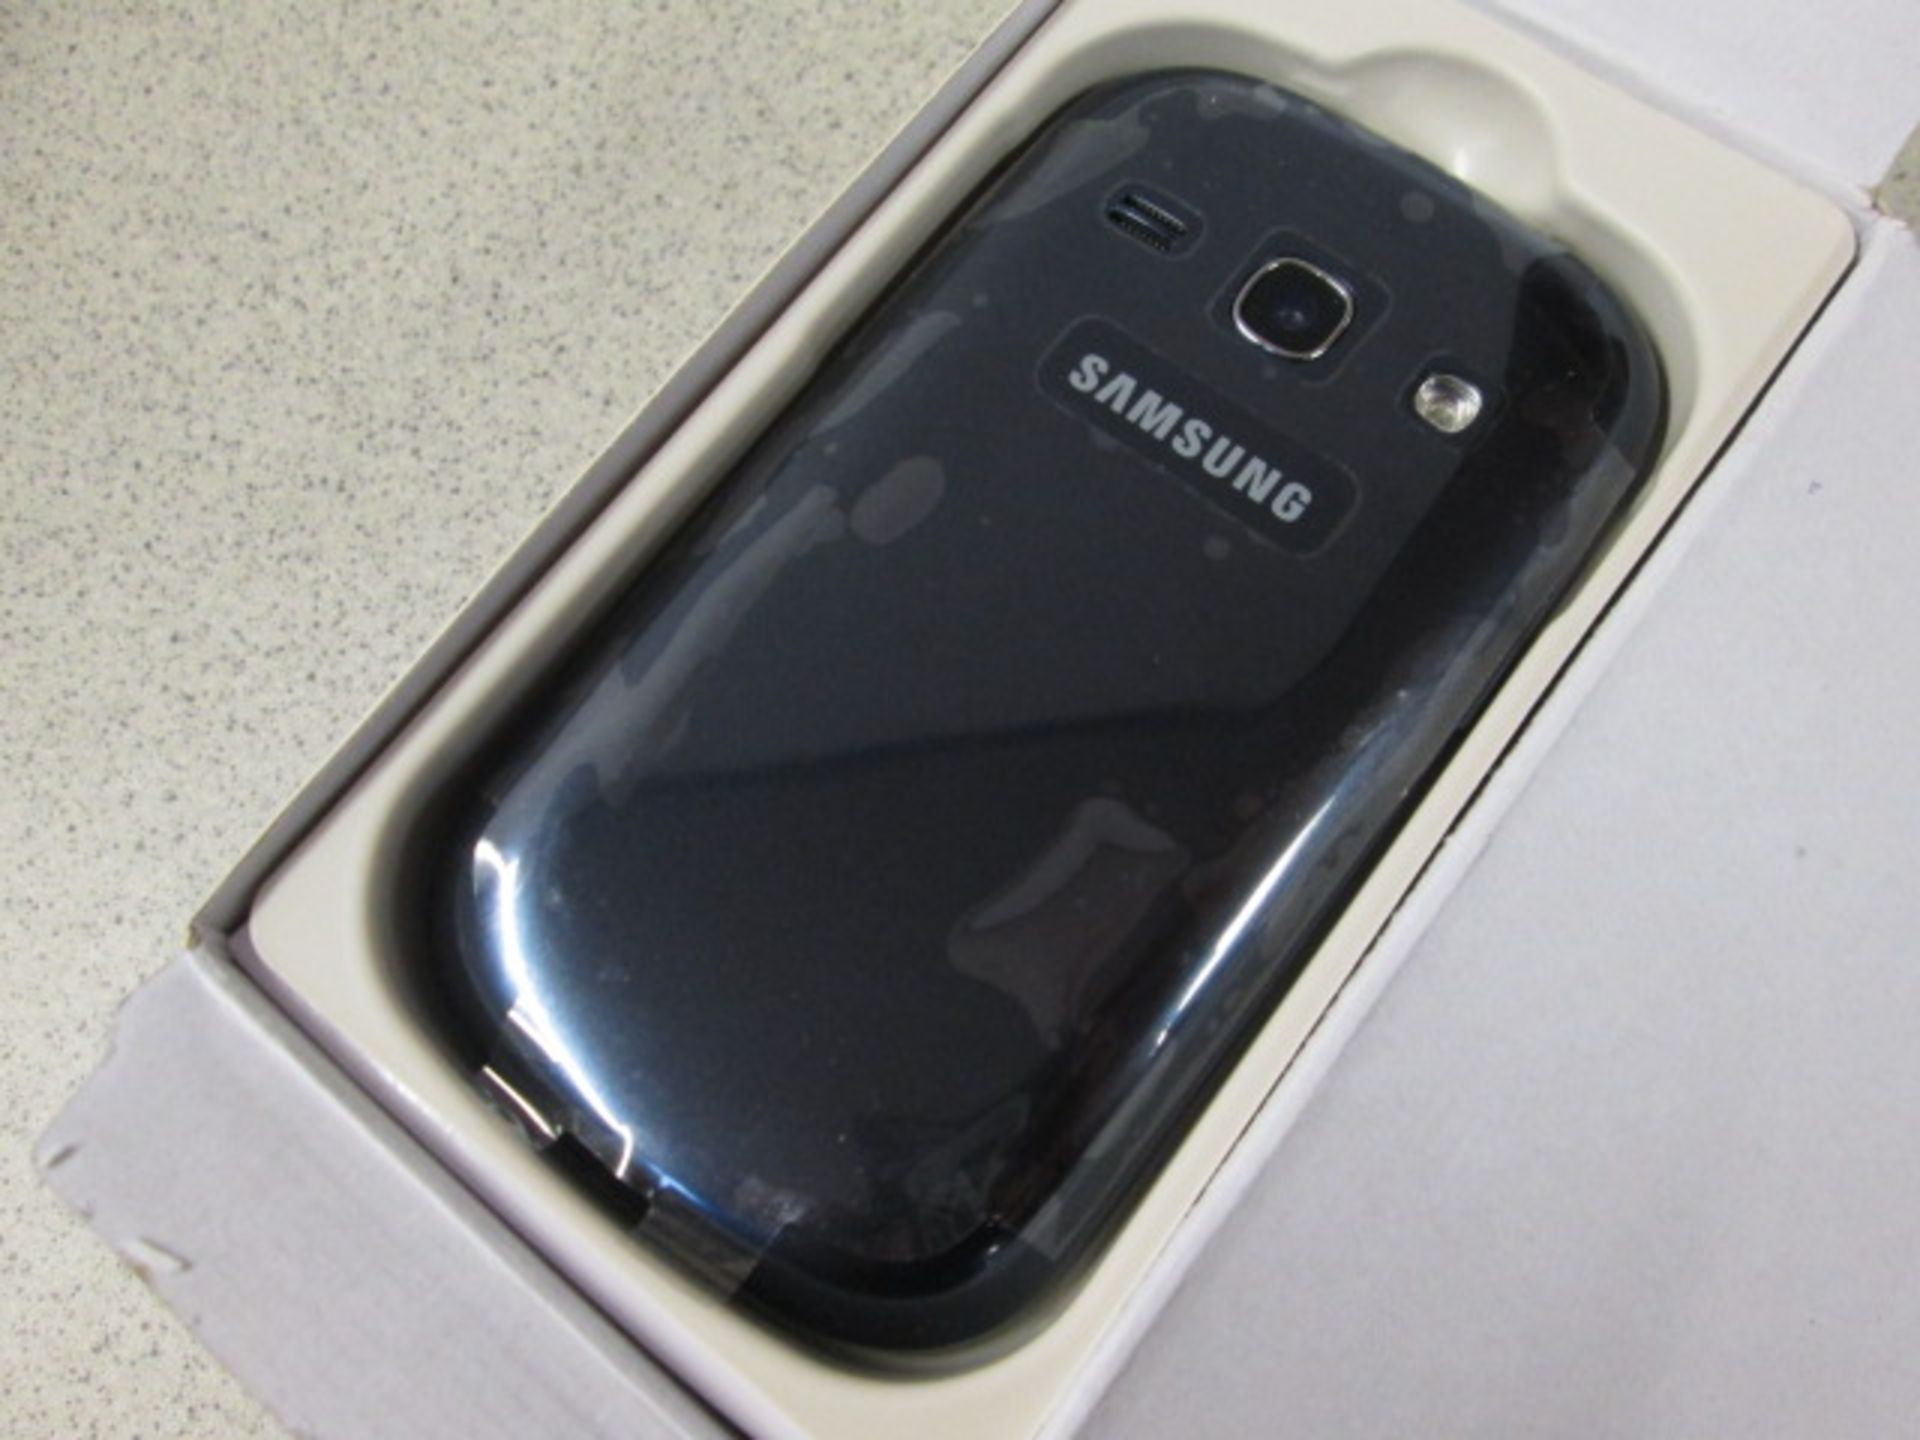 10 x Samsung Galaxy Fame, Model GT-S6810P, Mobile Phones. - Image 5 of 6